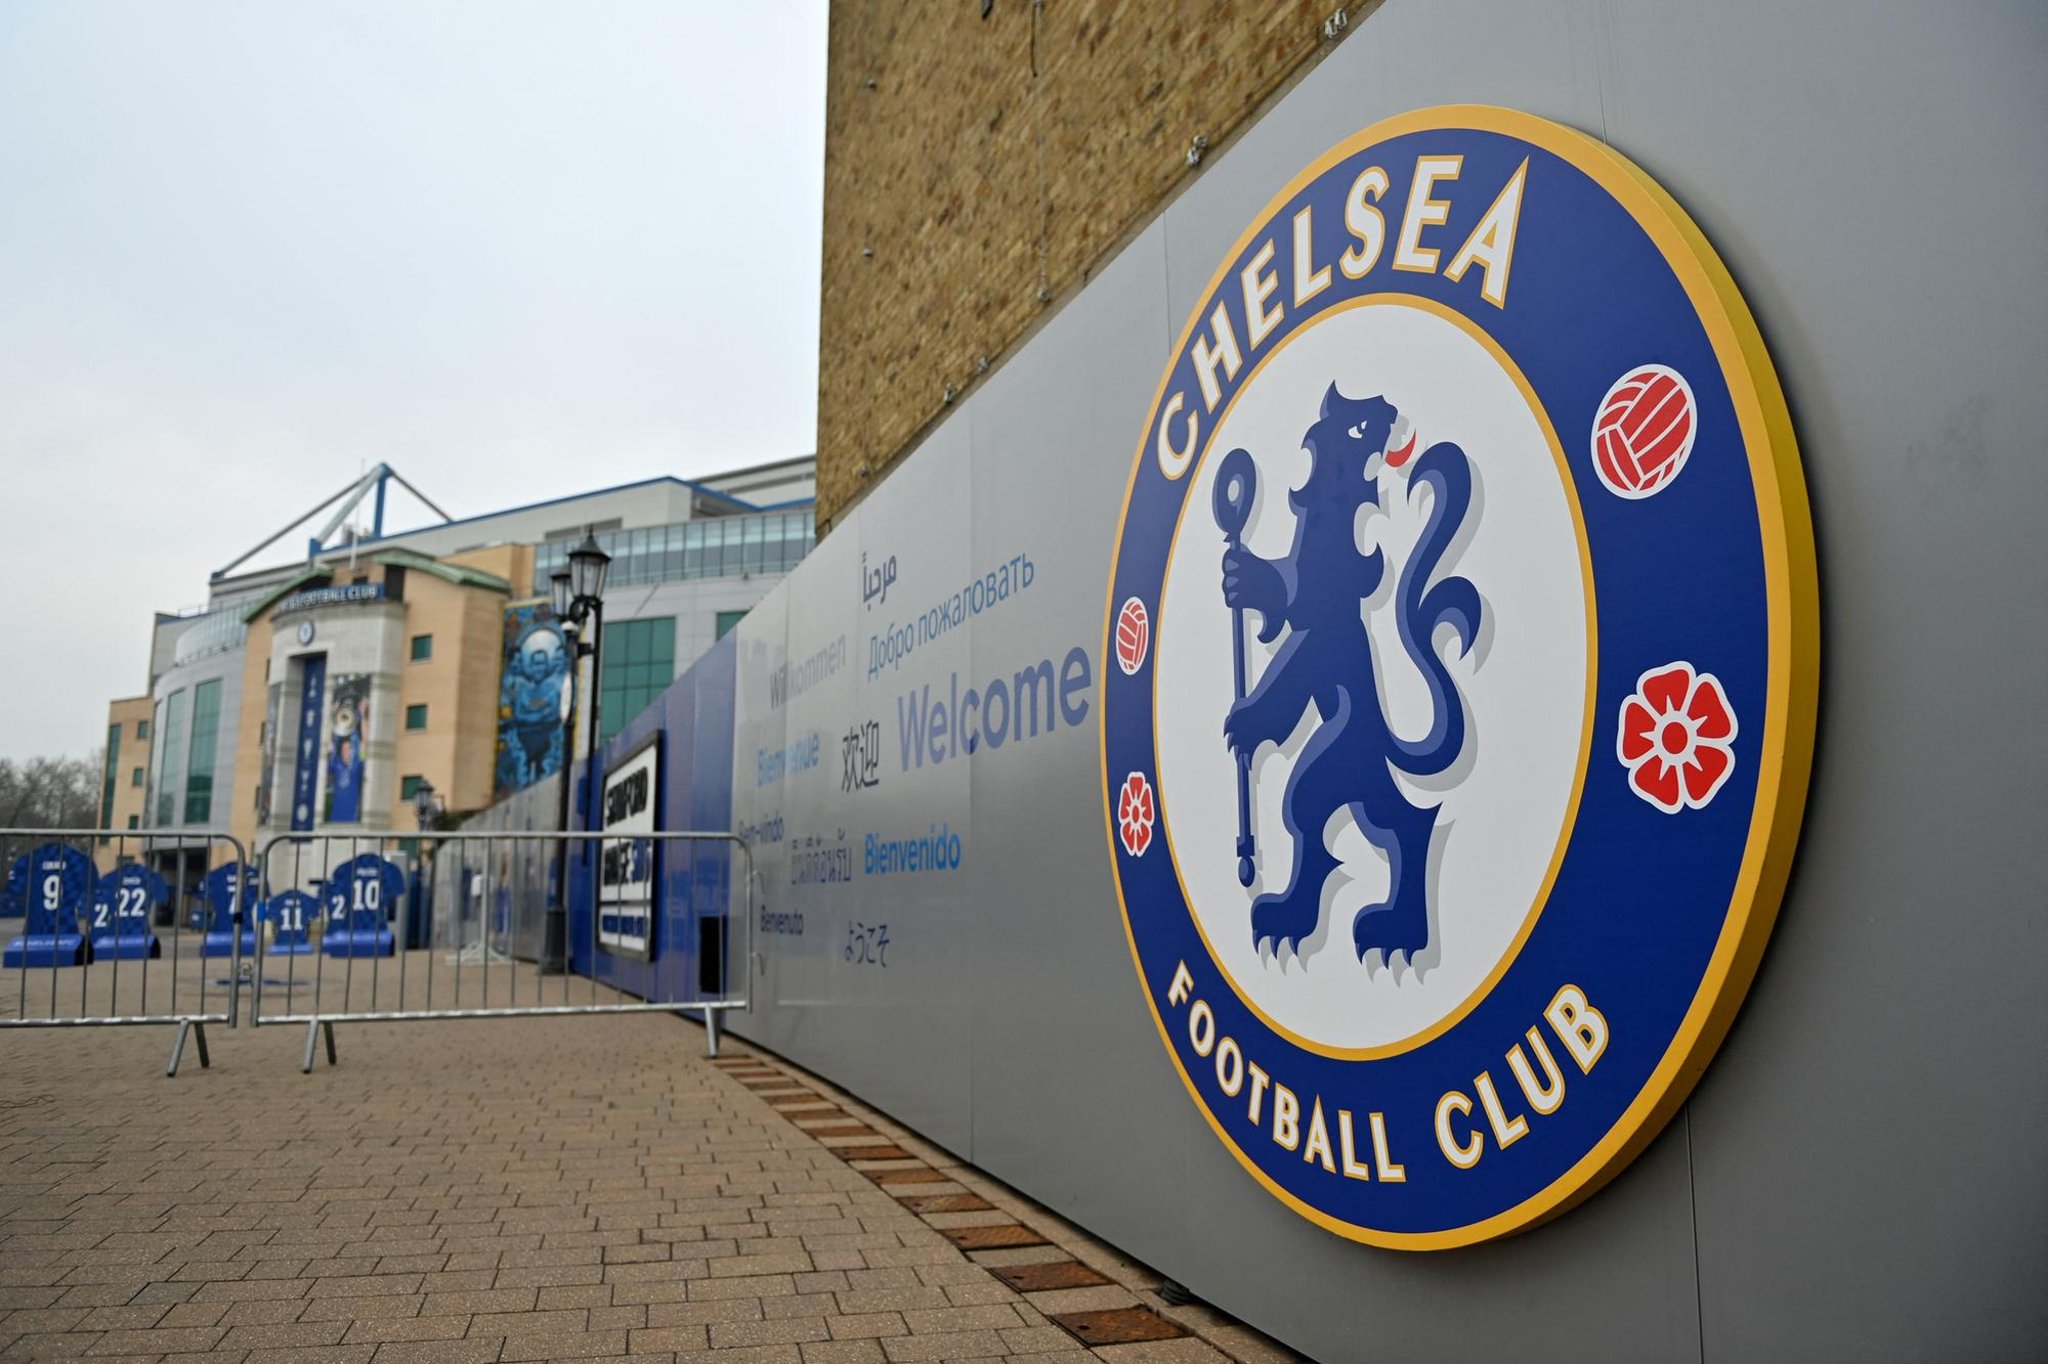 Chelsea are allowed to sell some tickets again after the UK government  alters the club's special licence - Eurosport